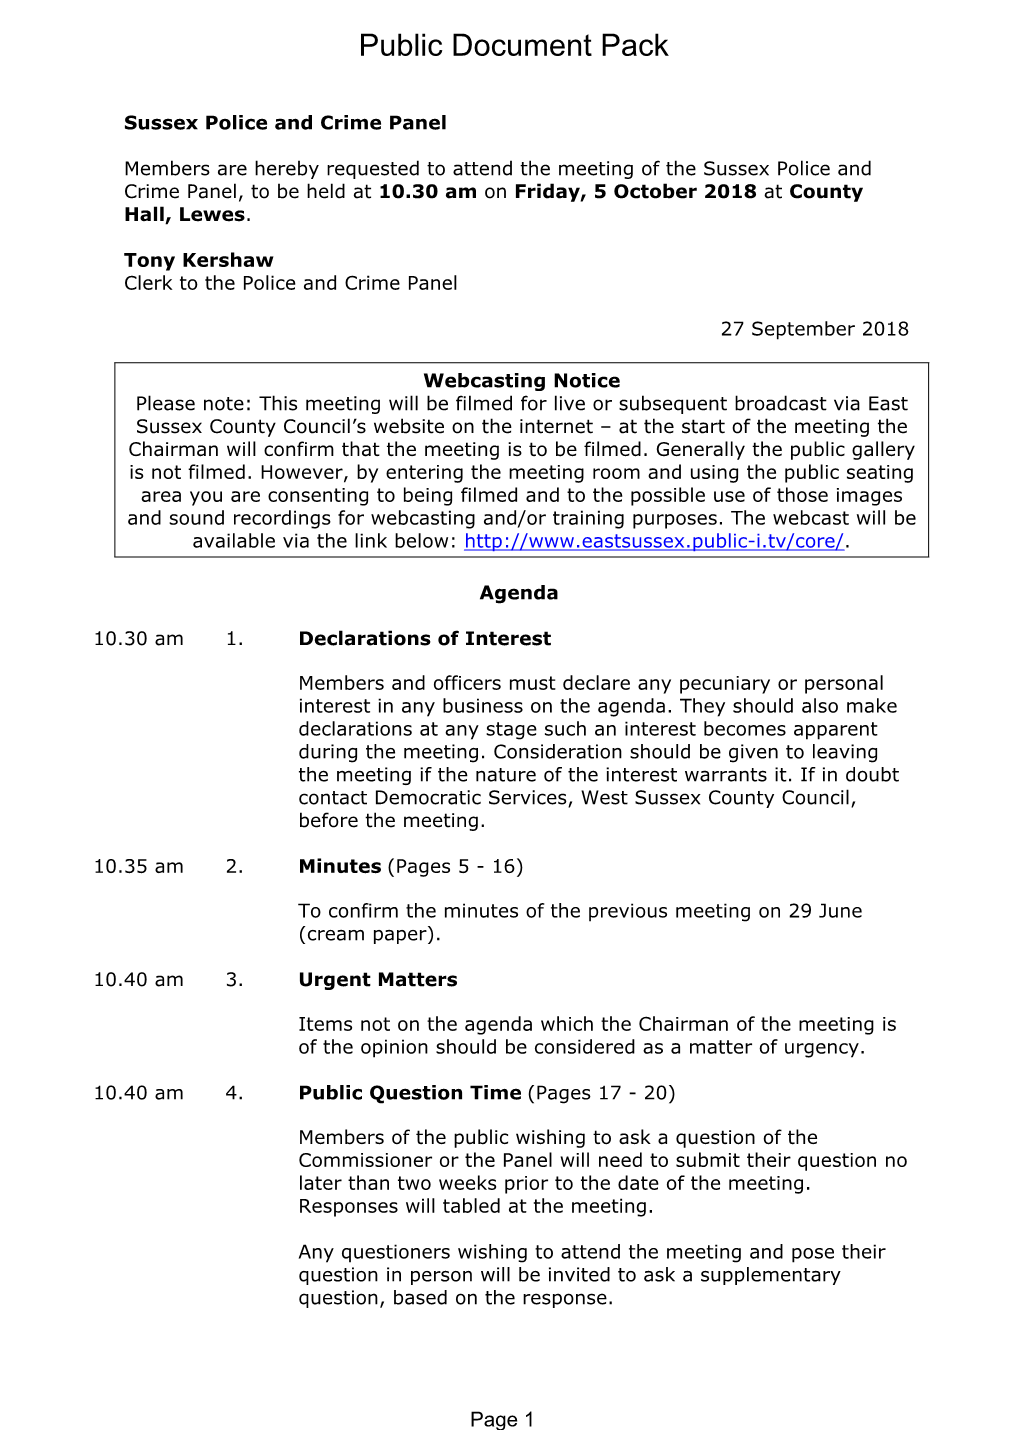 Agenda Document for Sussex Police and Crime Panel, 05/10/2018 10:30